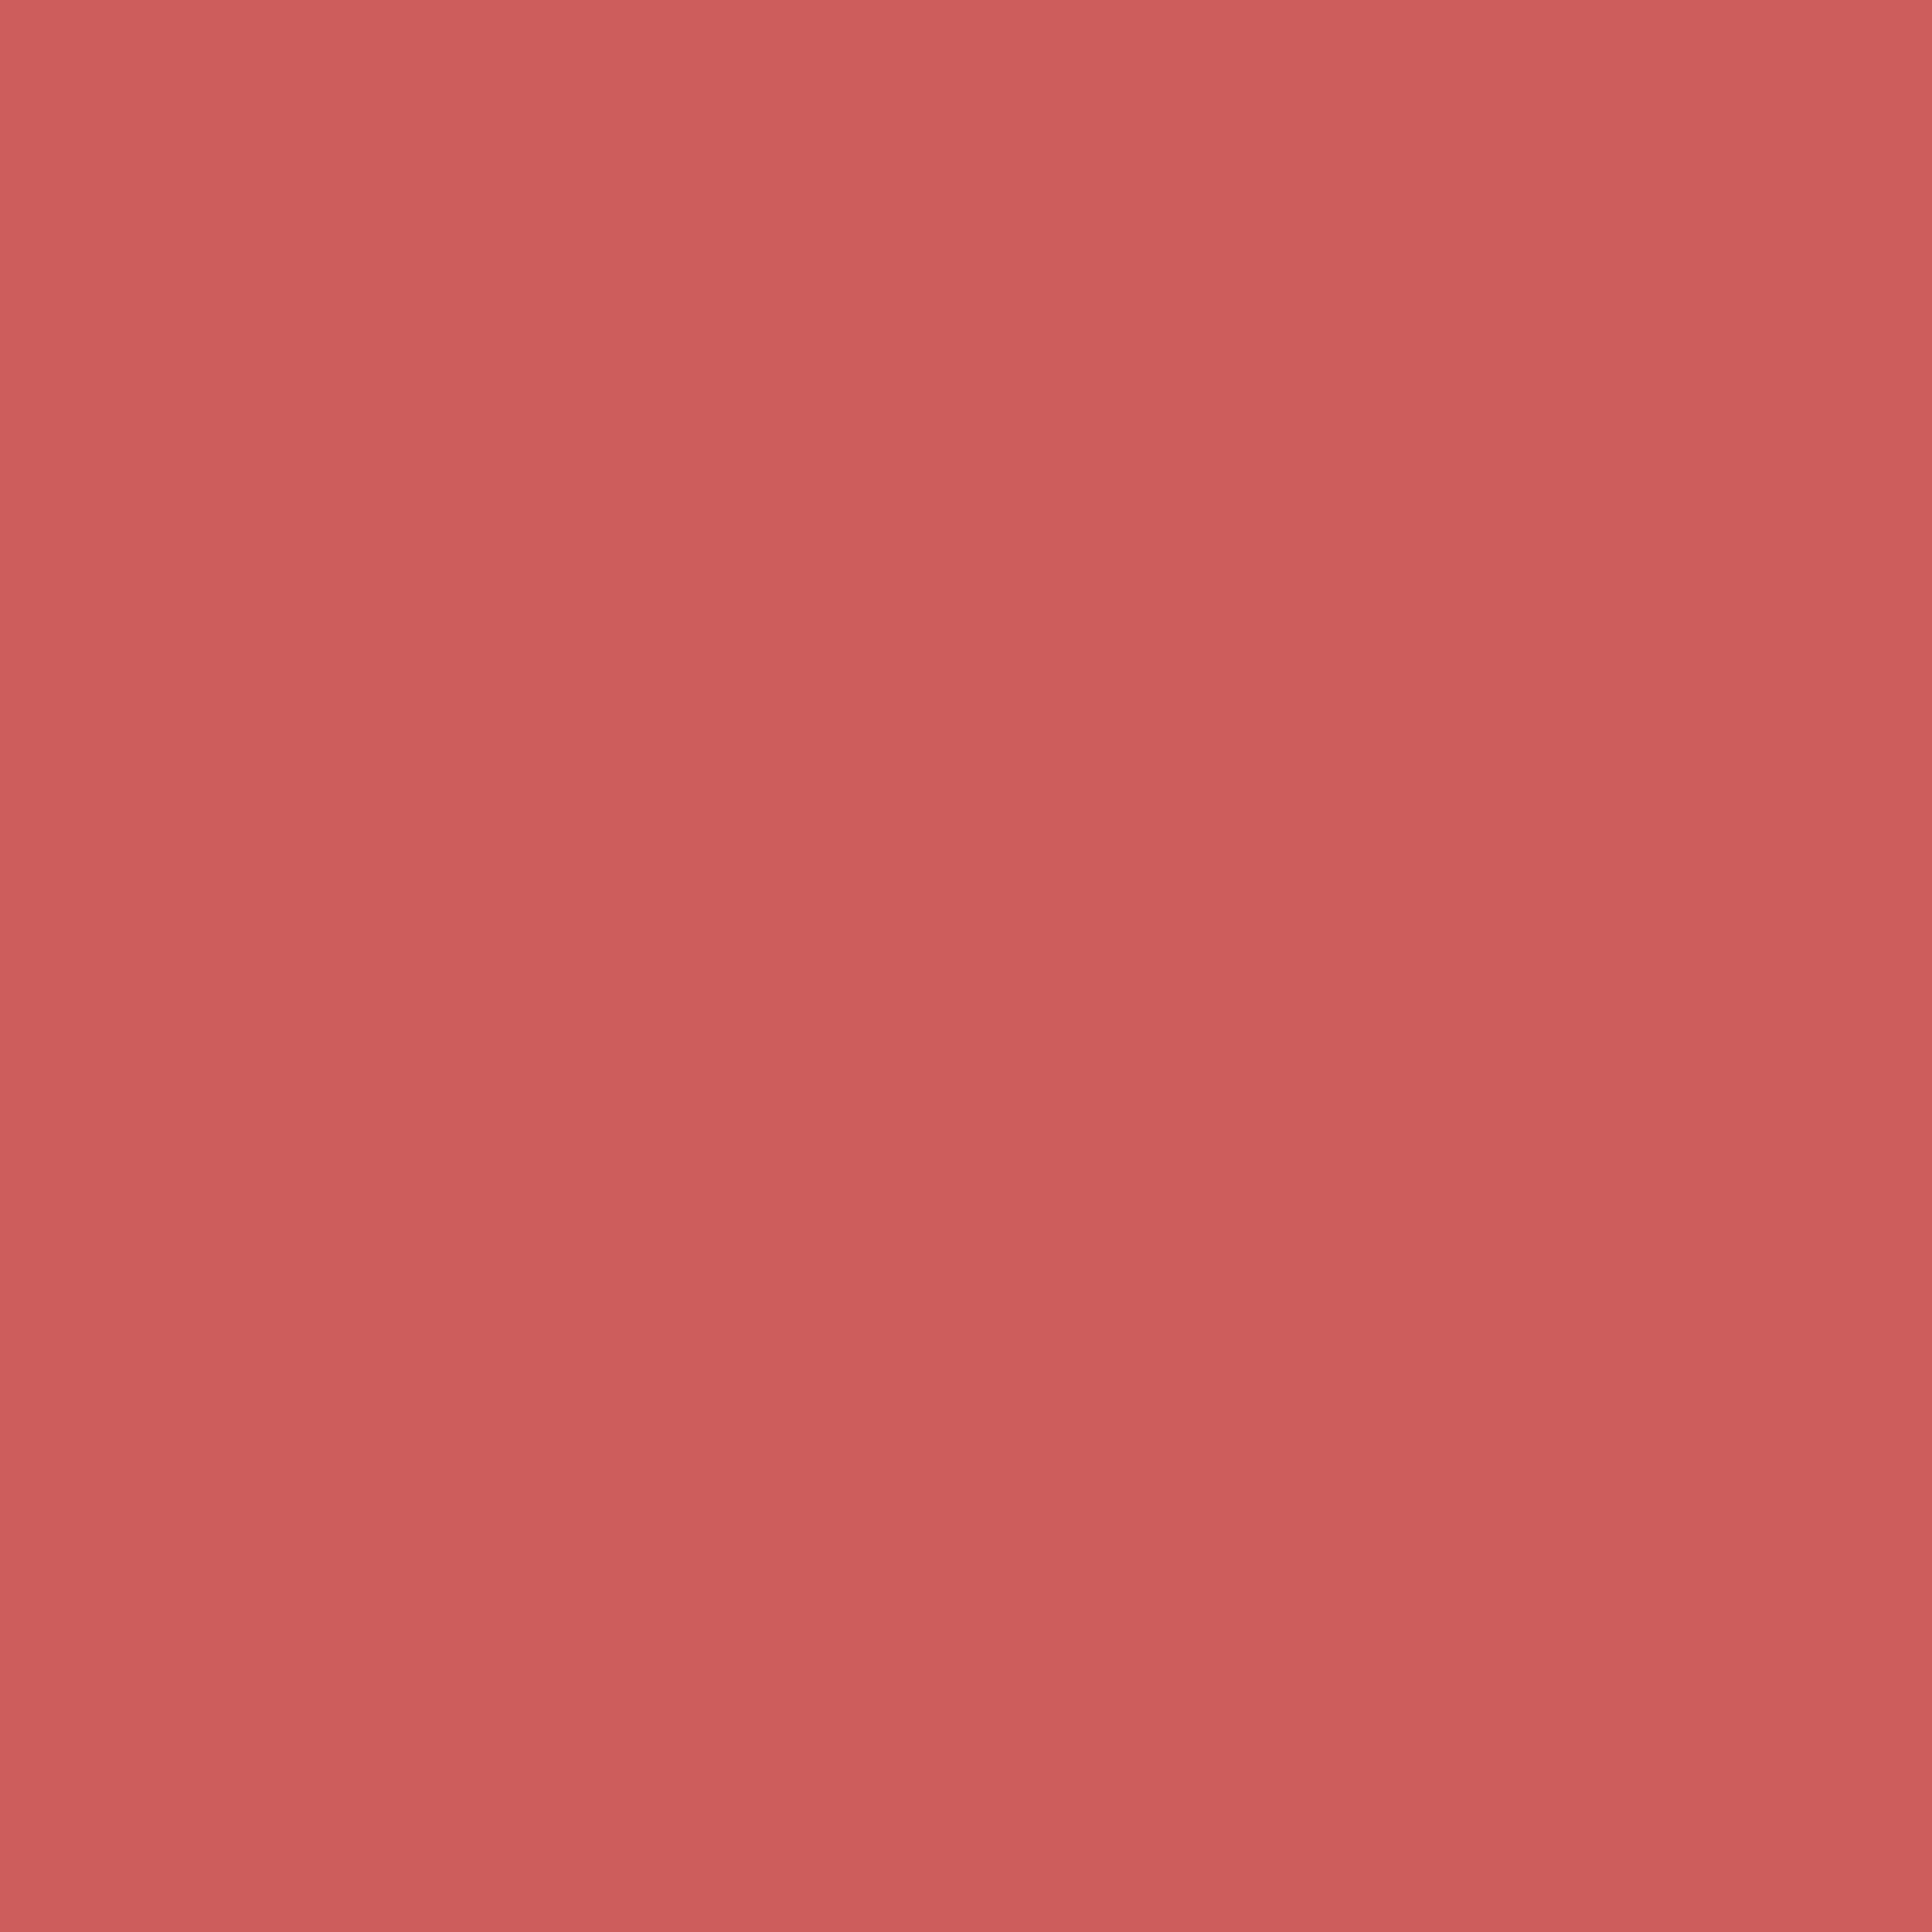 3600x3600 Indian Red Solid Color Background